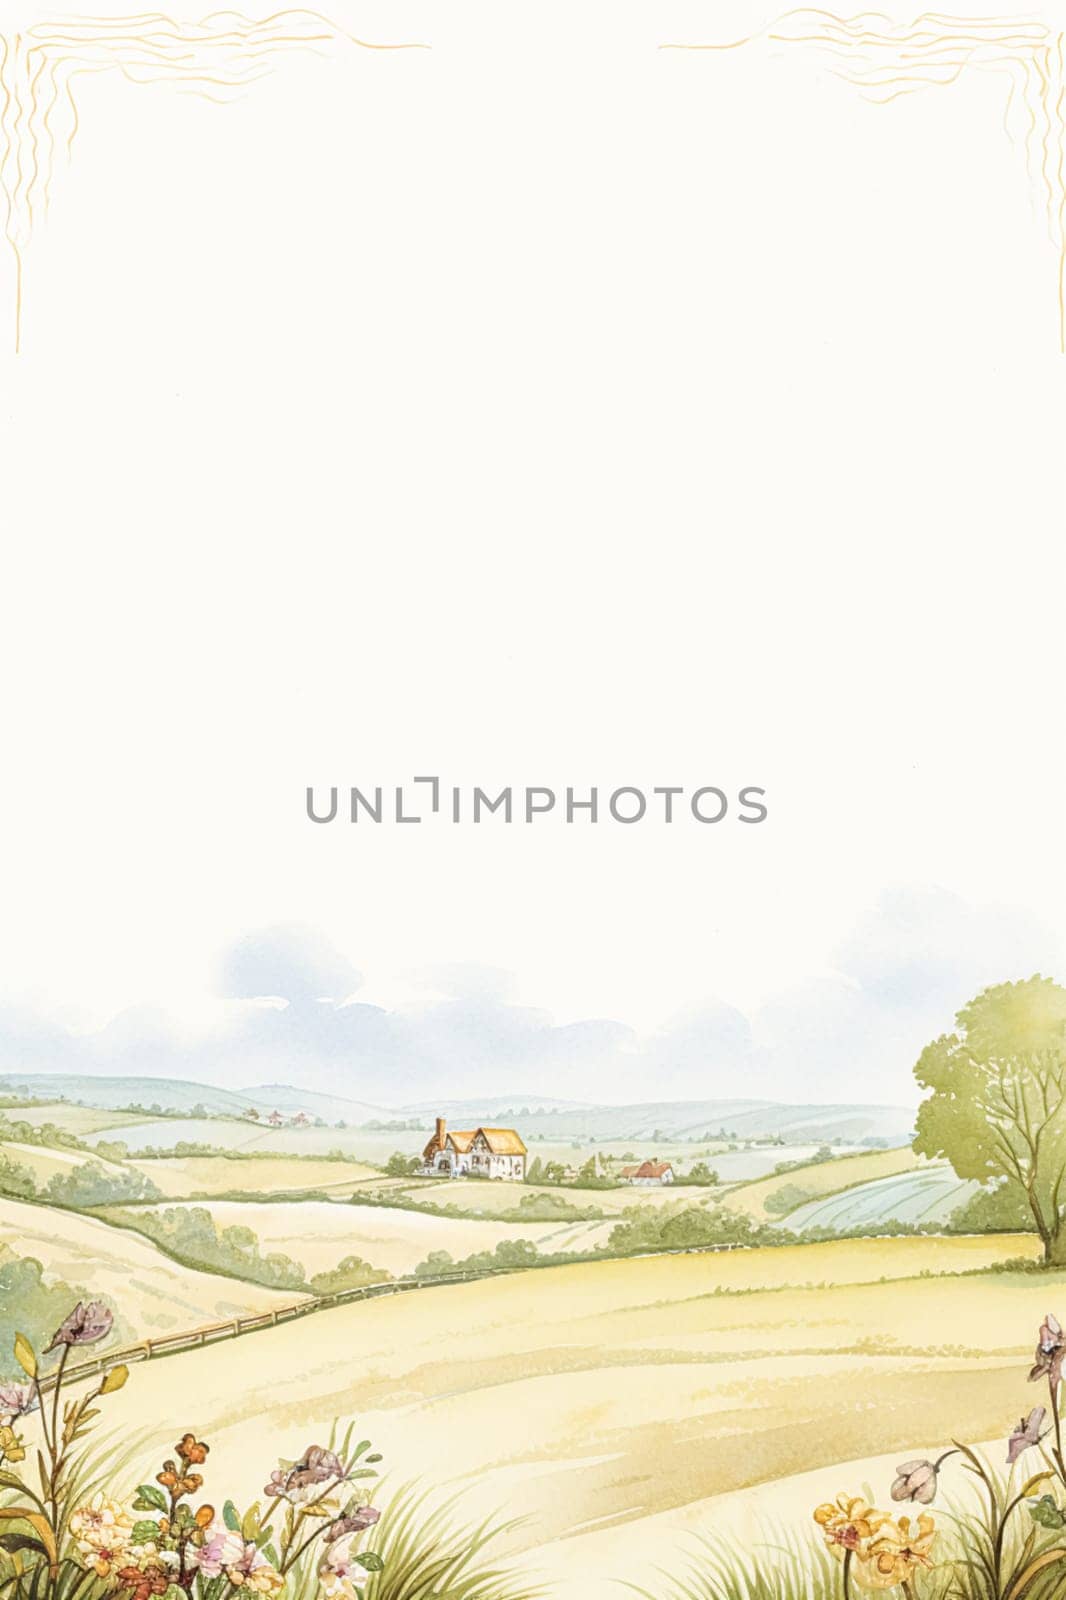 Book cover, digital paper illustration and greeting card design, English countryside style blank vintage art background for printable stationery, book page and ebook idea